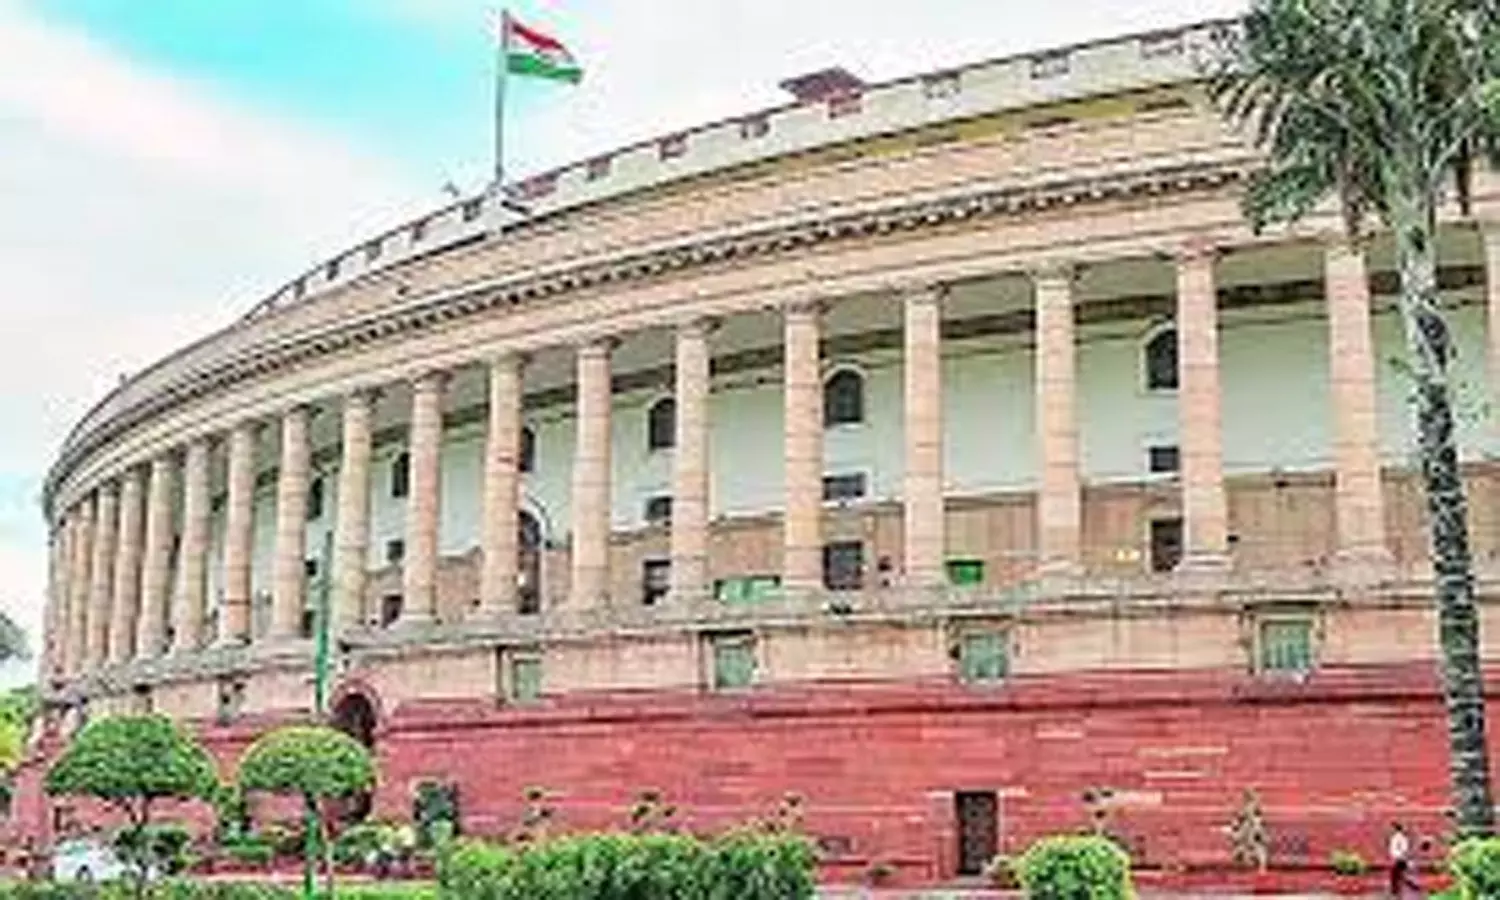 Rajya Sabha : Pawar summitted report on the deaths due to oxygen shortage in the country